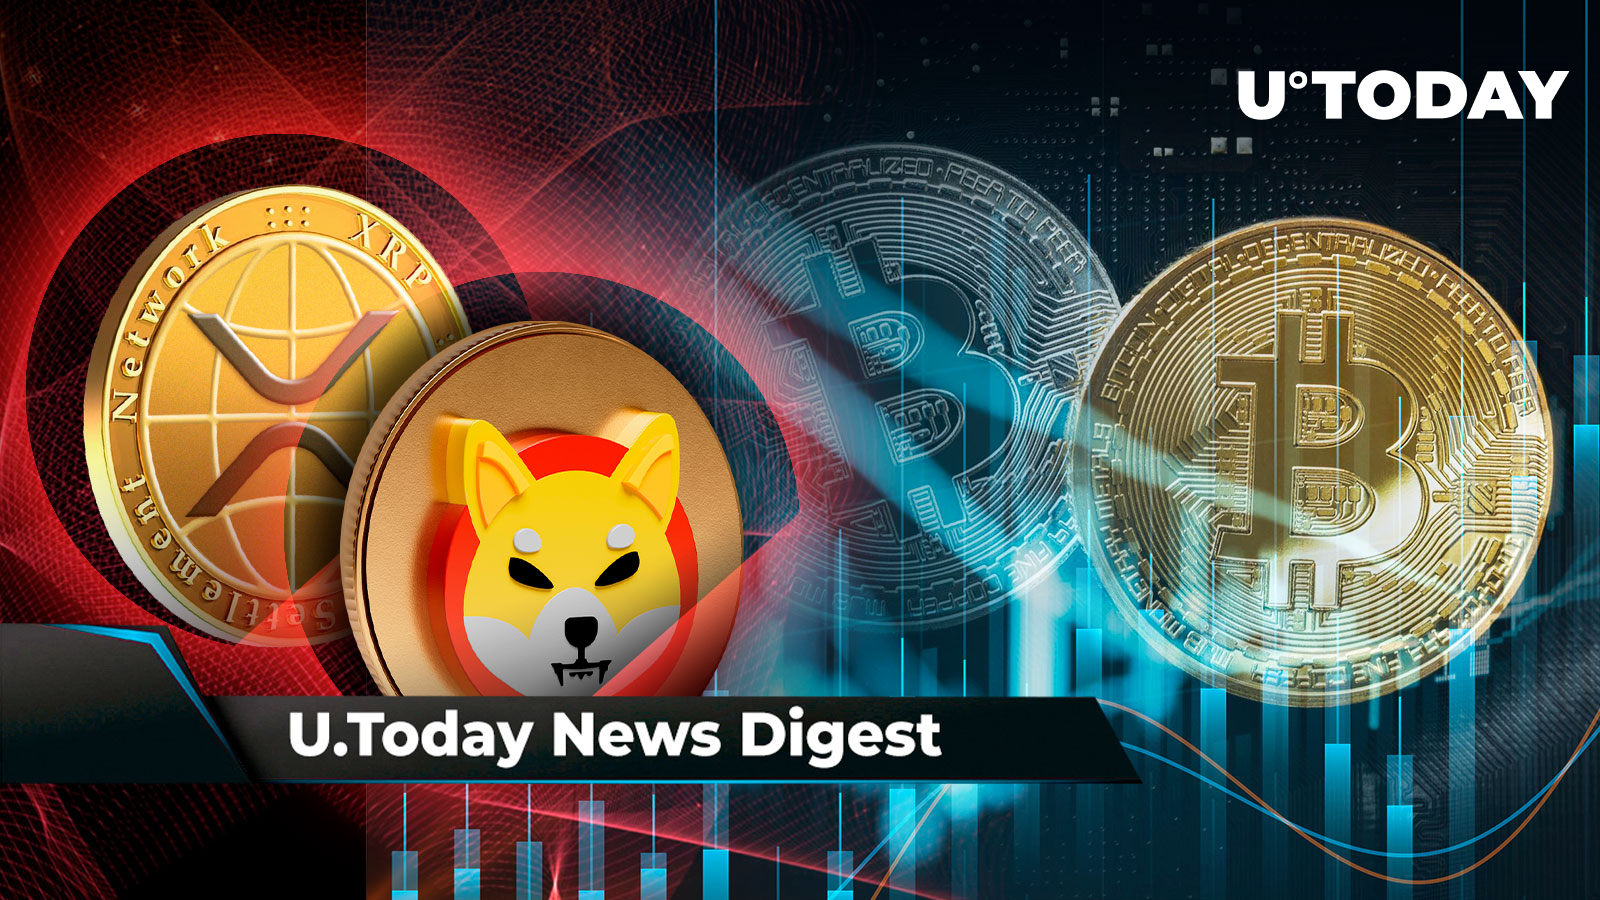 these-shib-and-xrp-pairs-eye-delisting-from-major-exchange-btc-targets-usd30-000-now-shib-army-pushes-shib-burns-high-into-green-crypto-news-digest-by-u-today